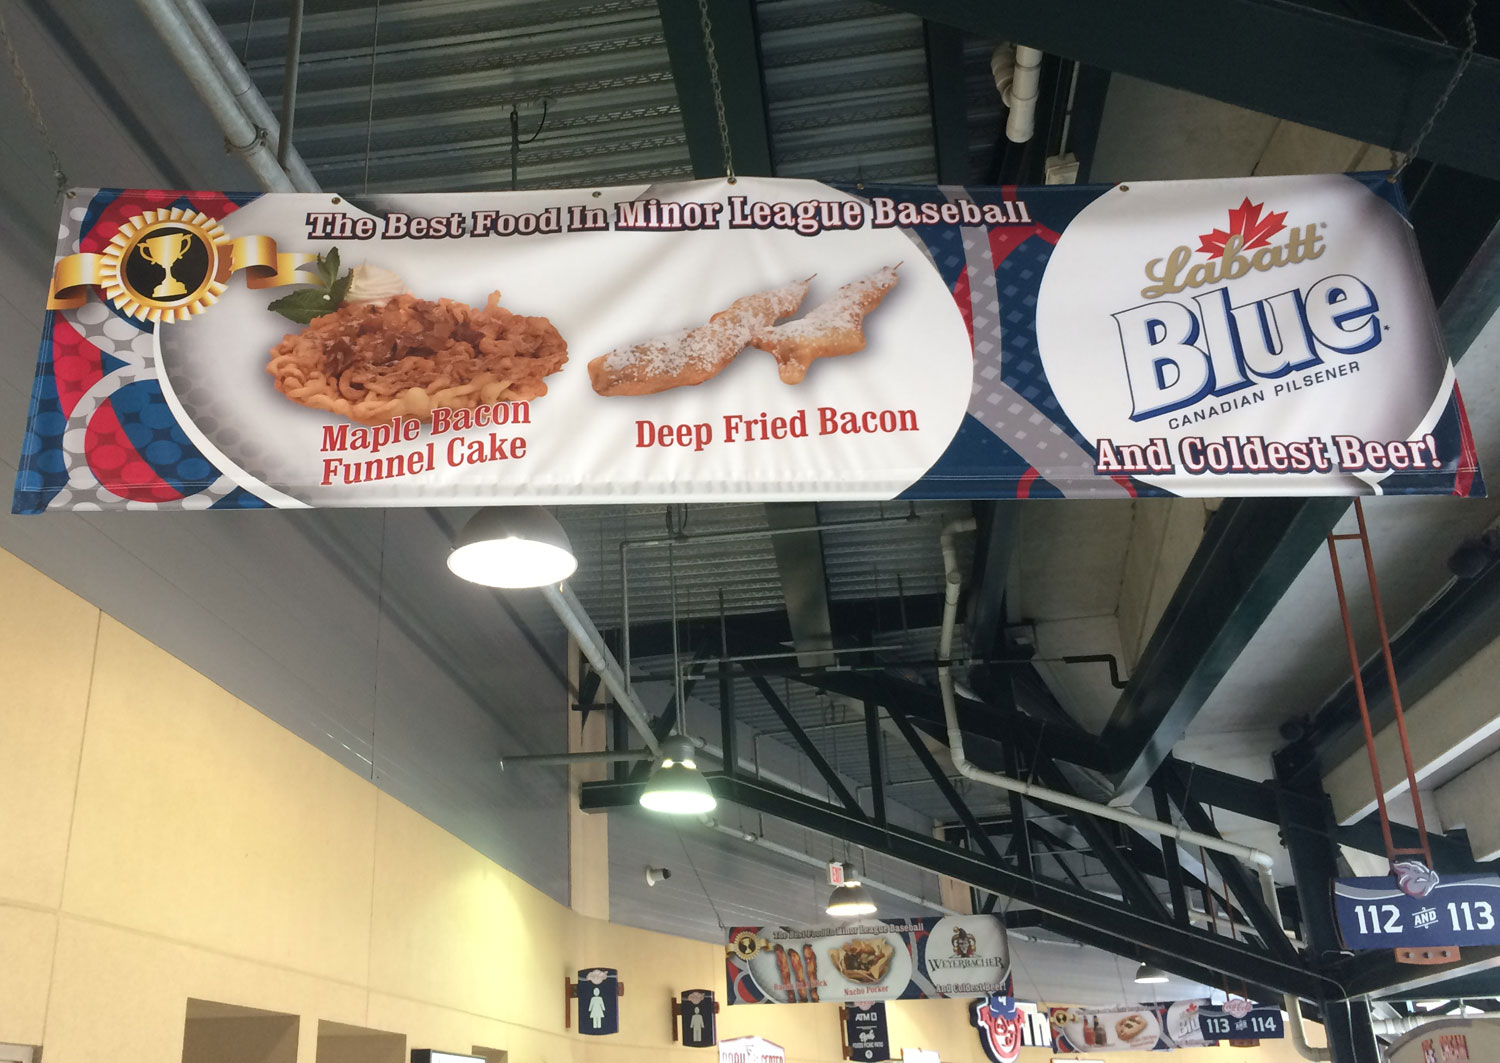 Signs proclaim "the best concessions in minor league baseball," many of which include bacon. (WTOP/Noah Frank)